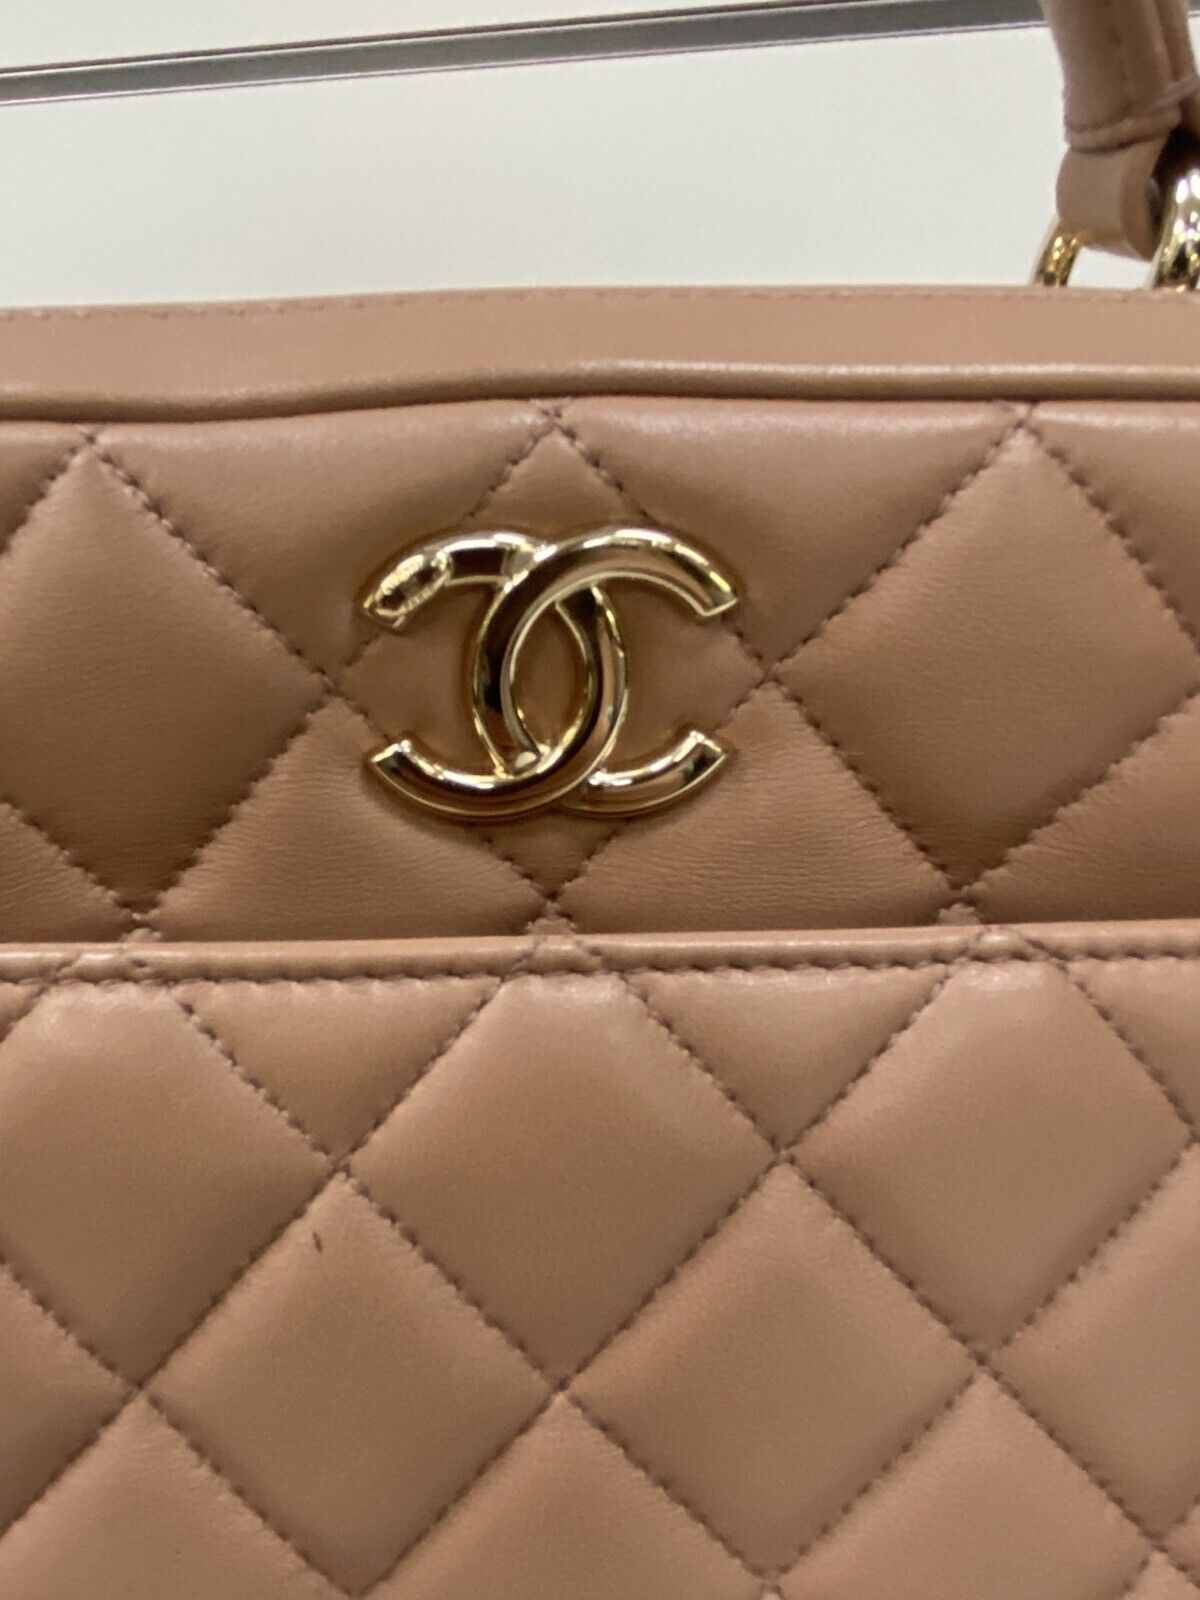 Chanel Caramel Quilted Leather Mini Classic Top Handle Bag Chanel